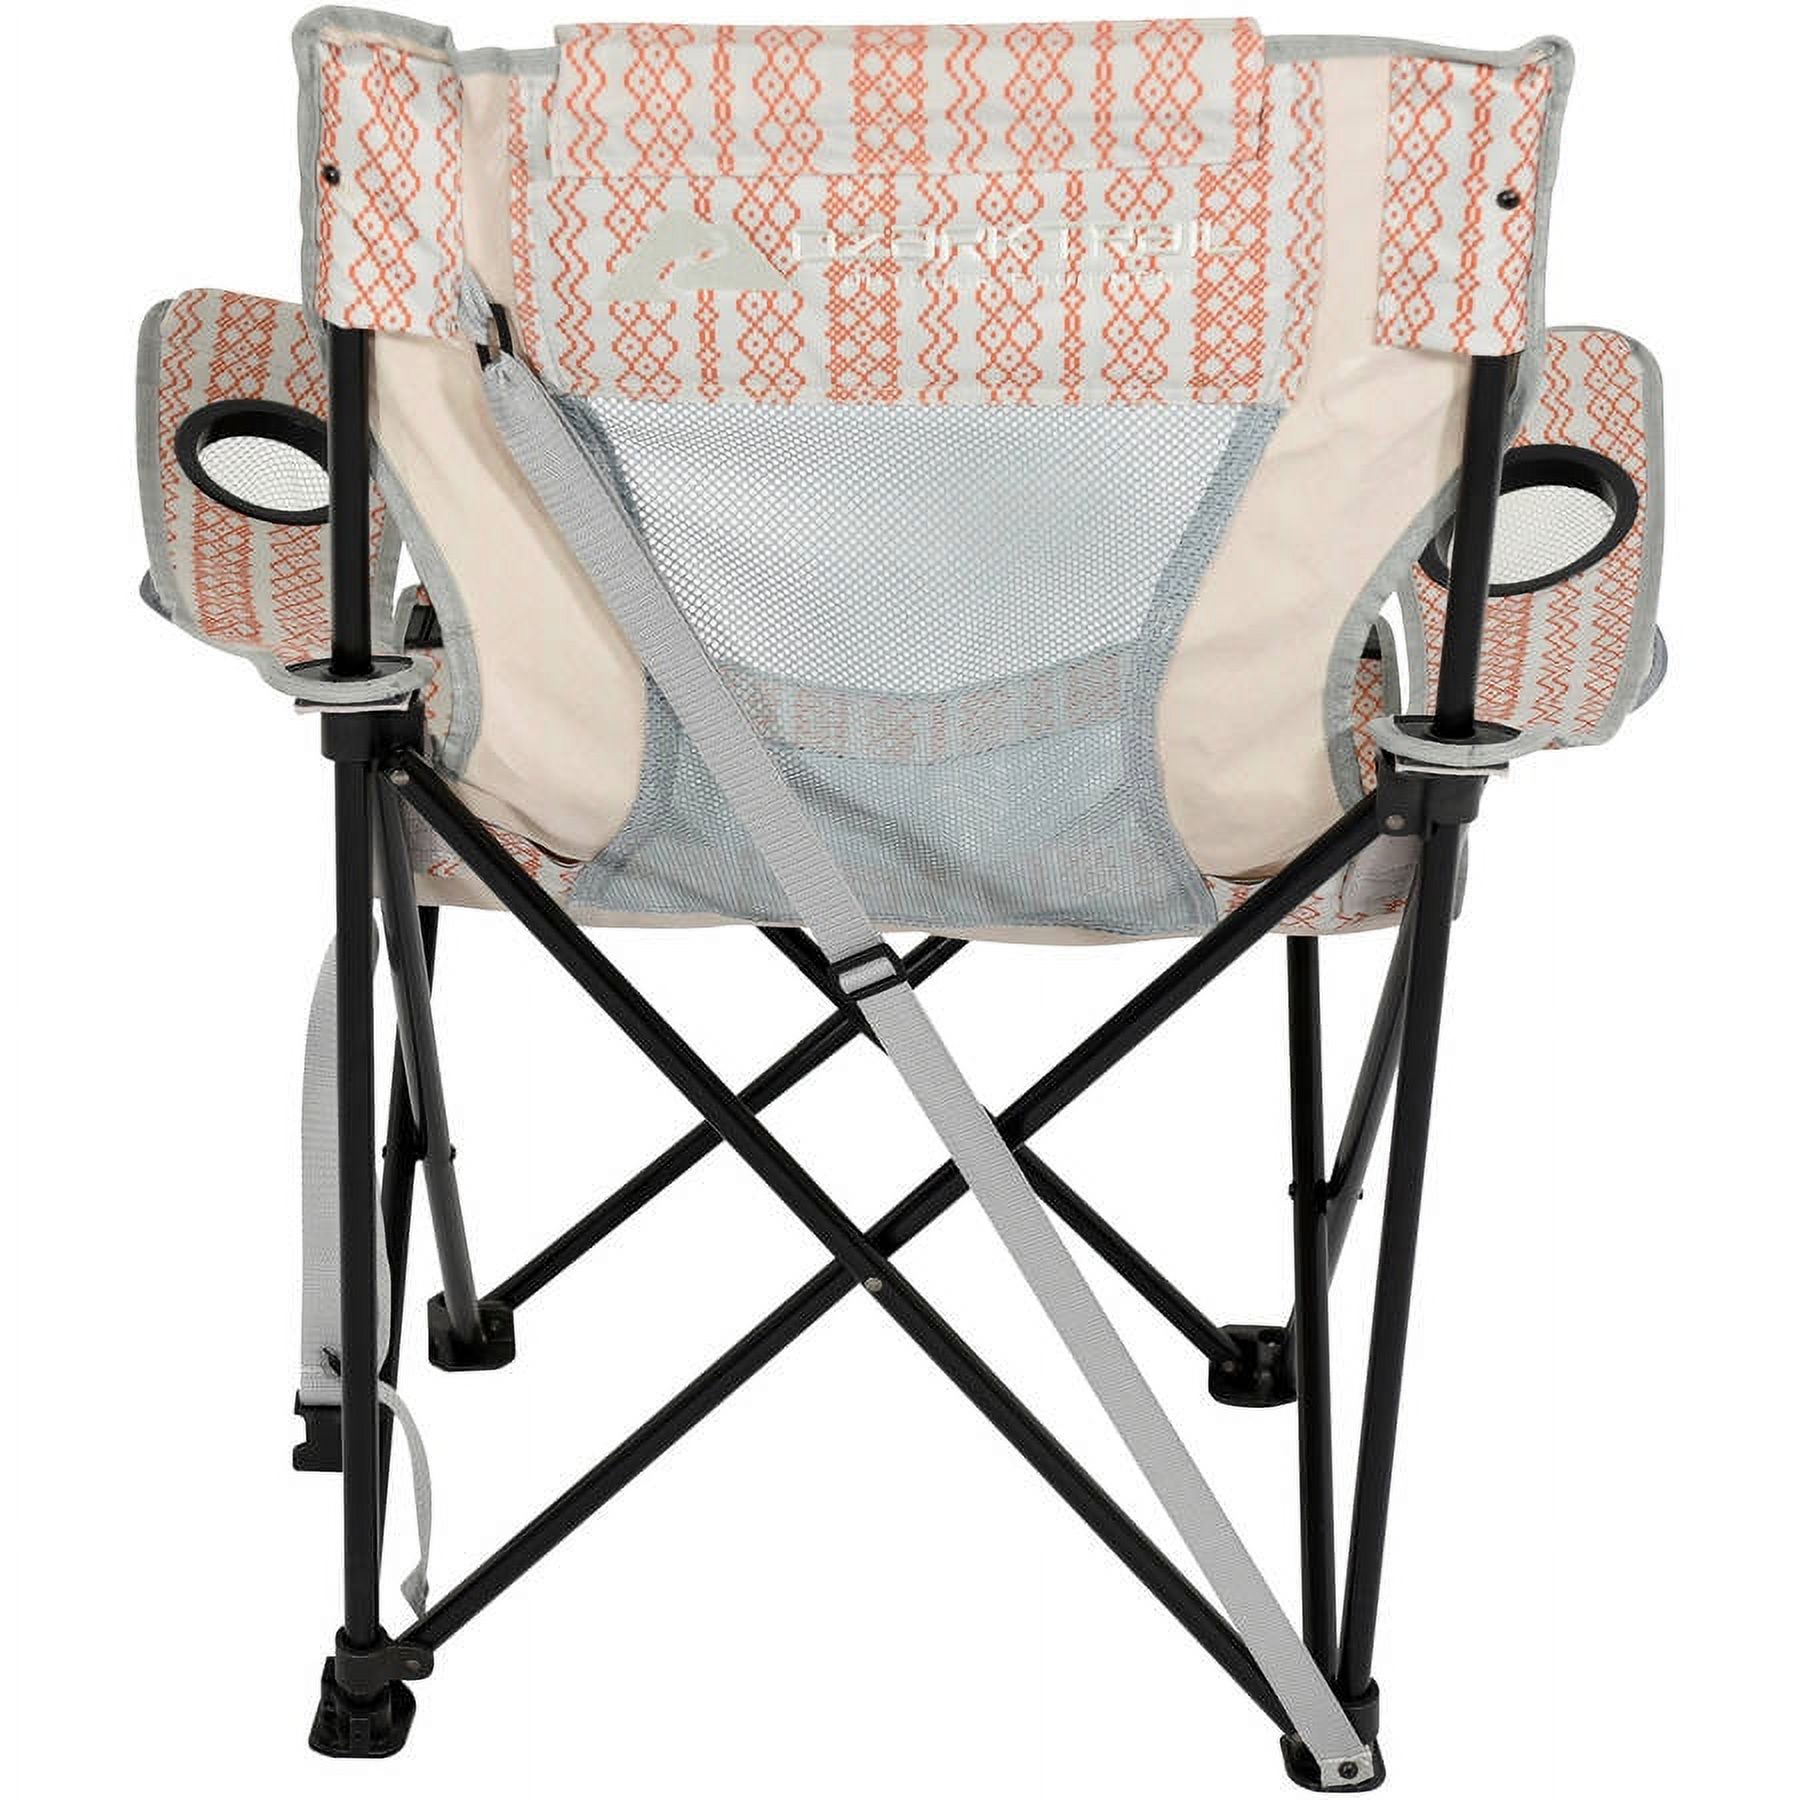 Oversized Mesh Lounge Chair - image 5 of 8